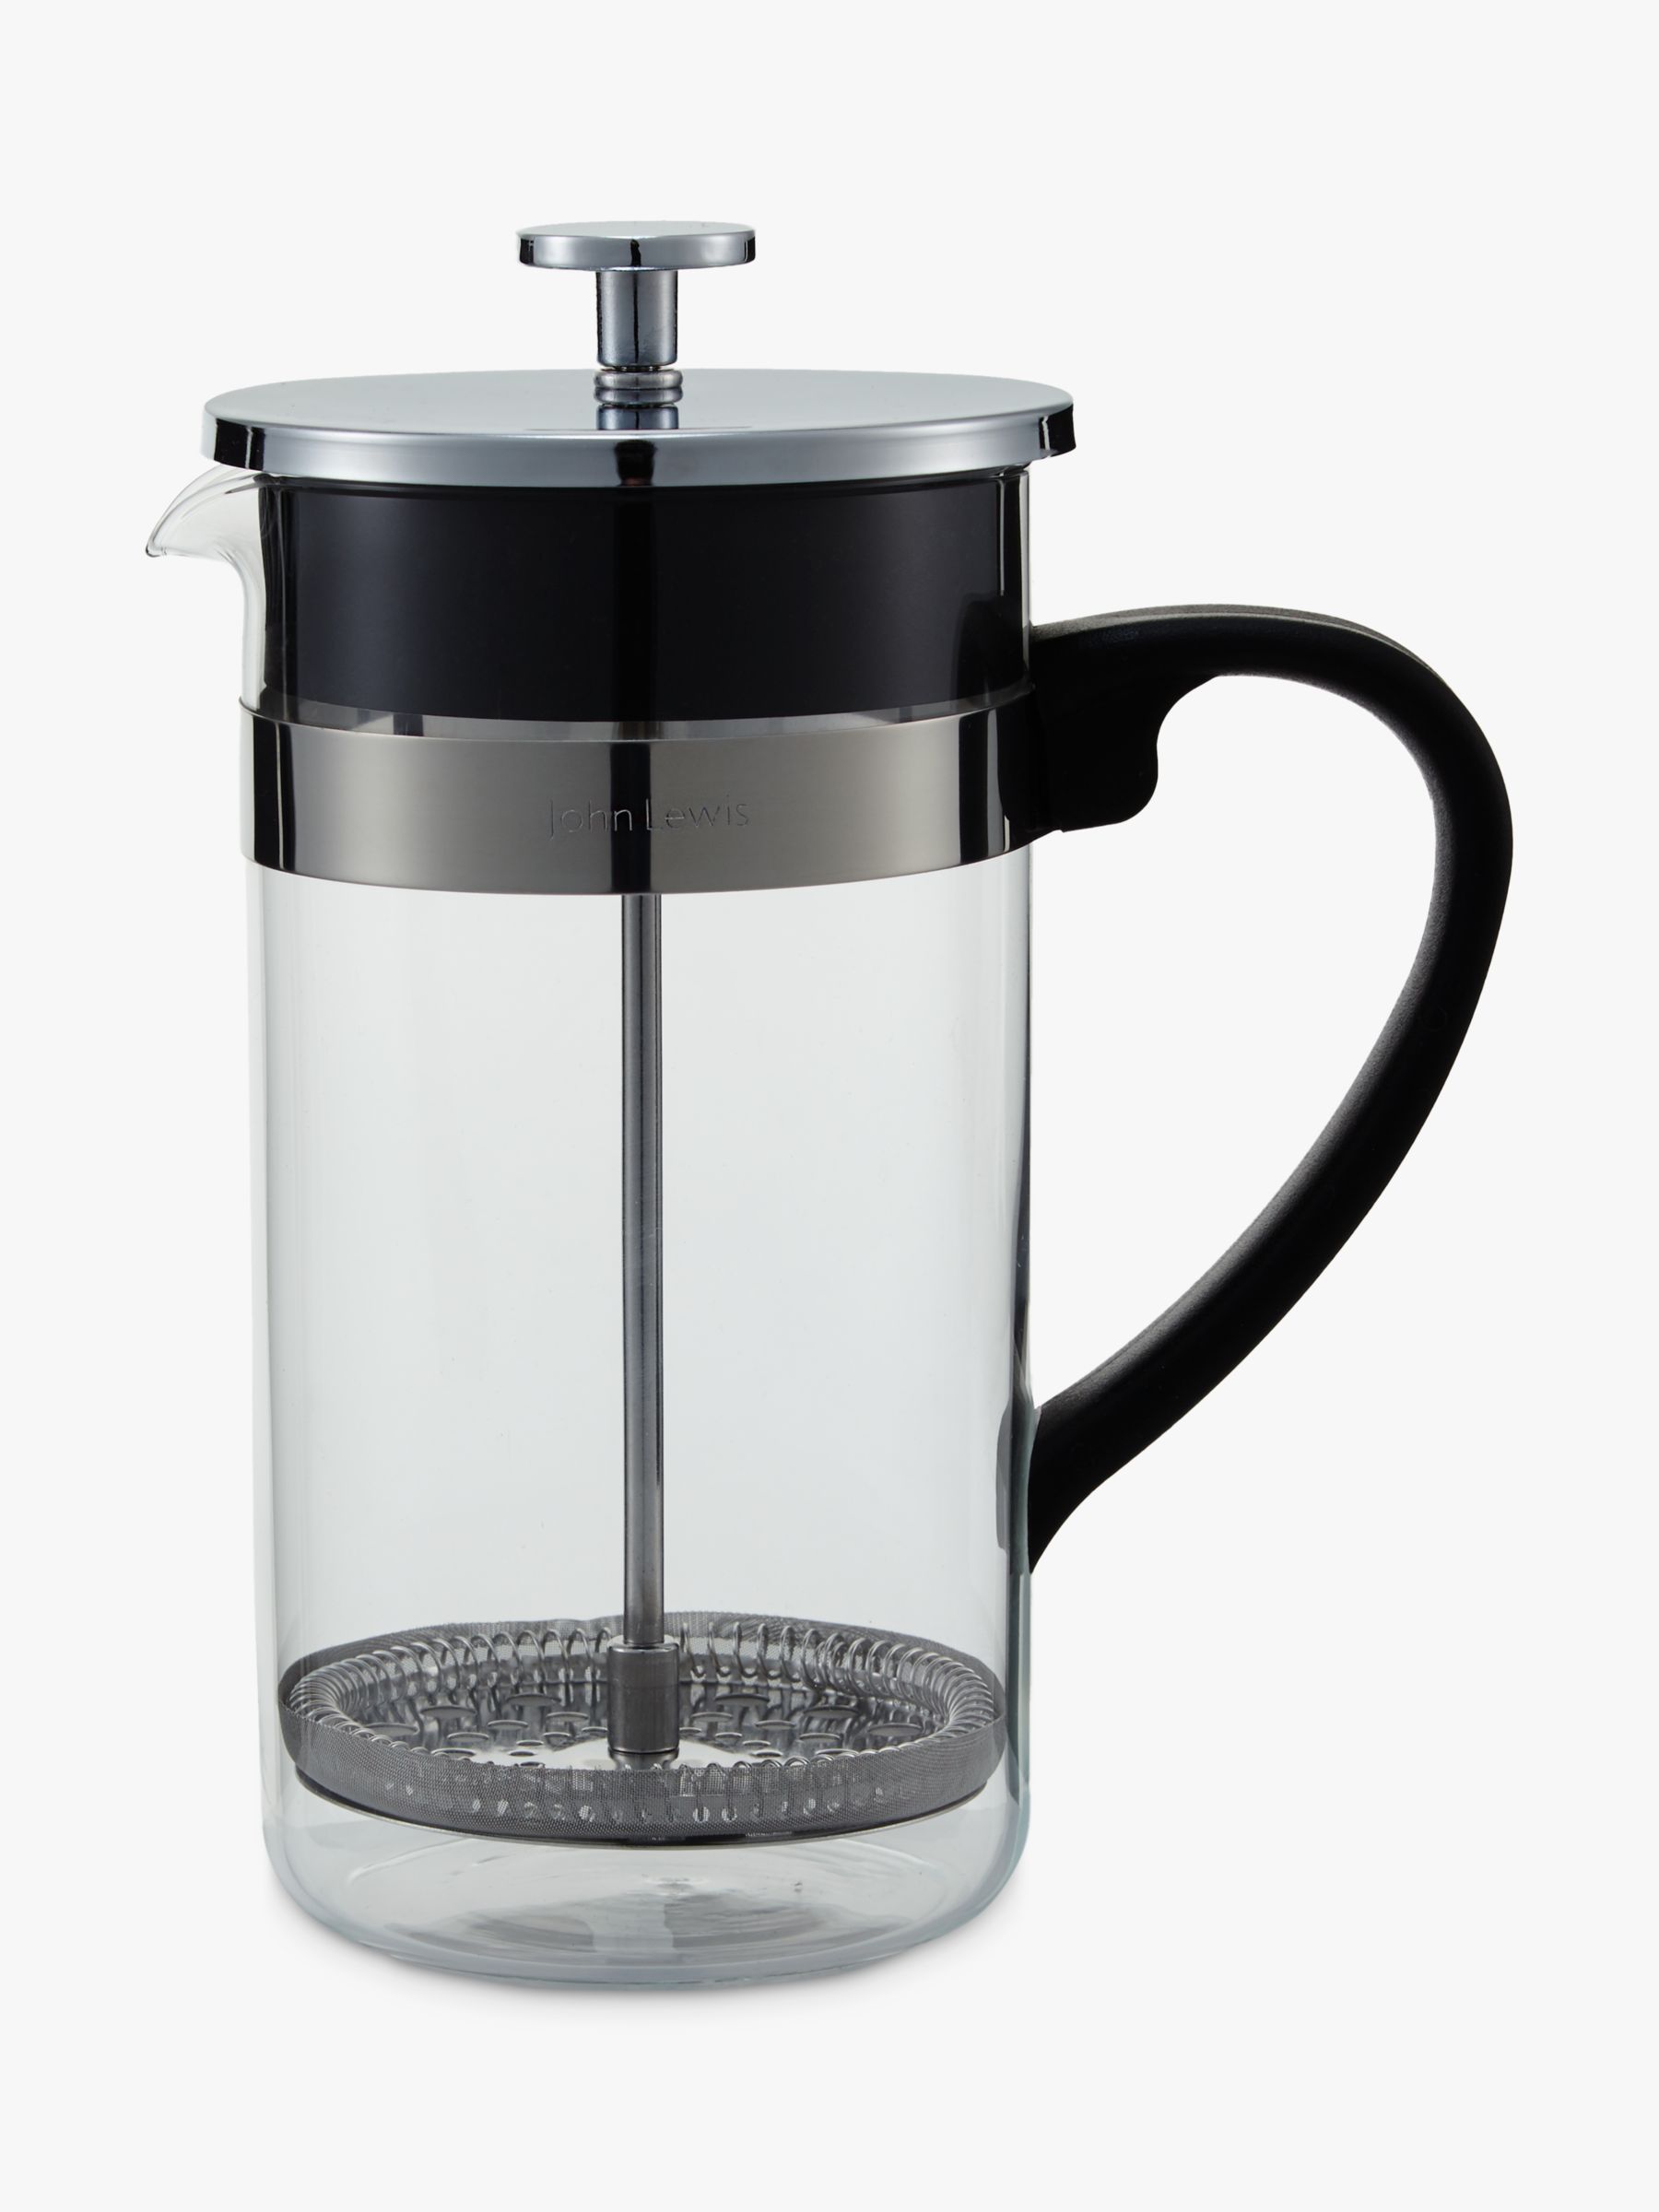 House by John Lewis Cafetiere, 8 Cup